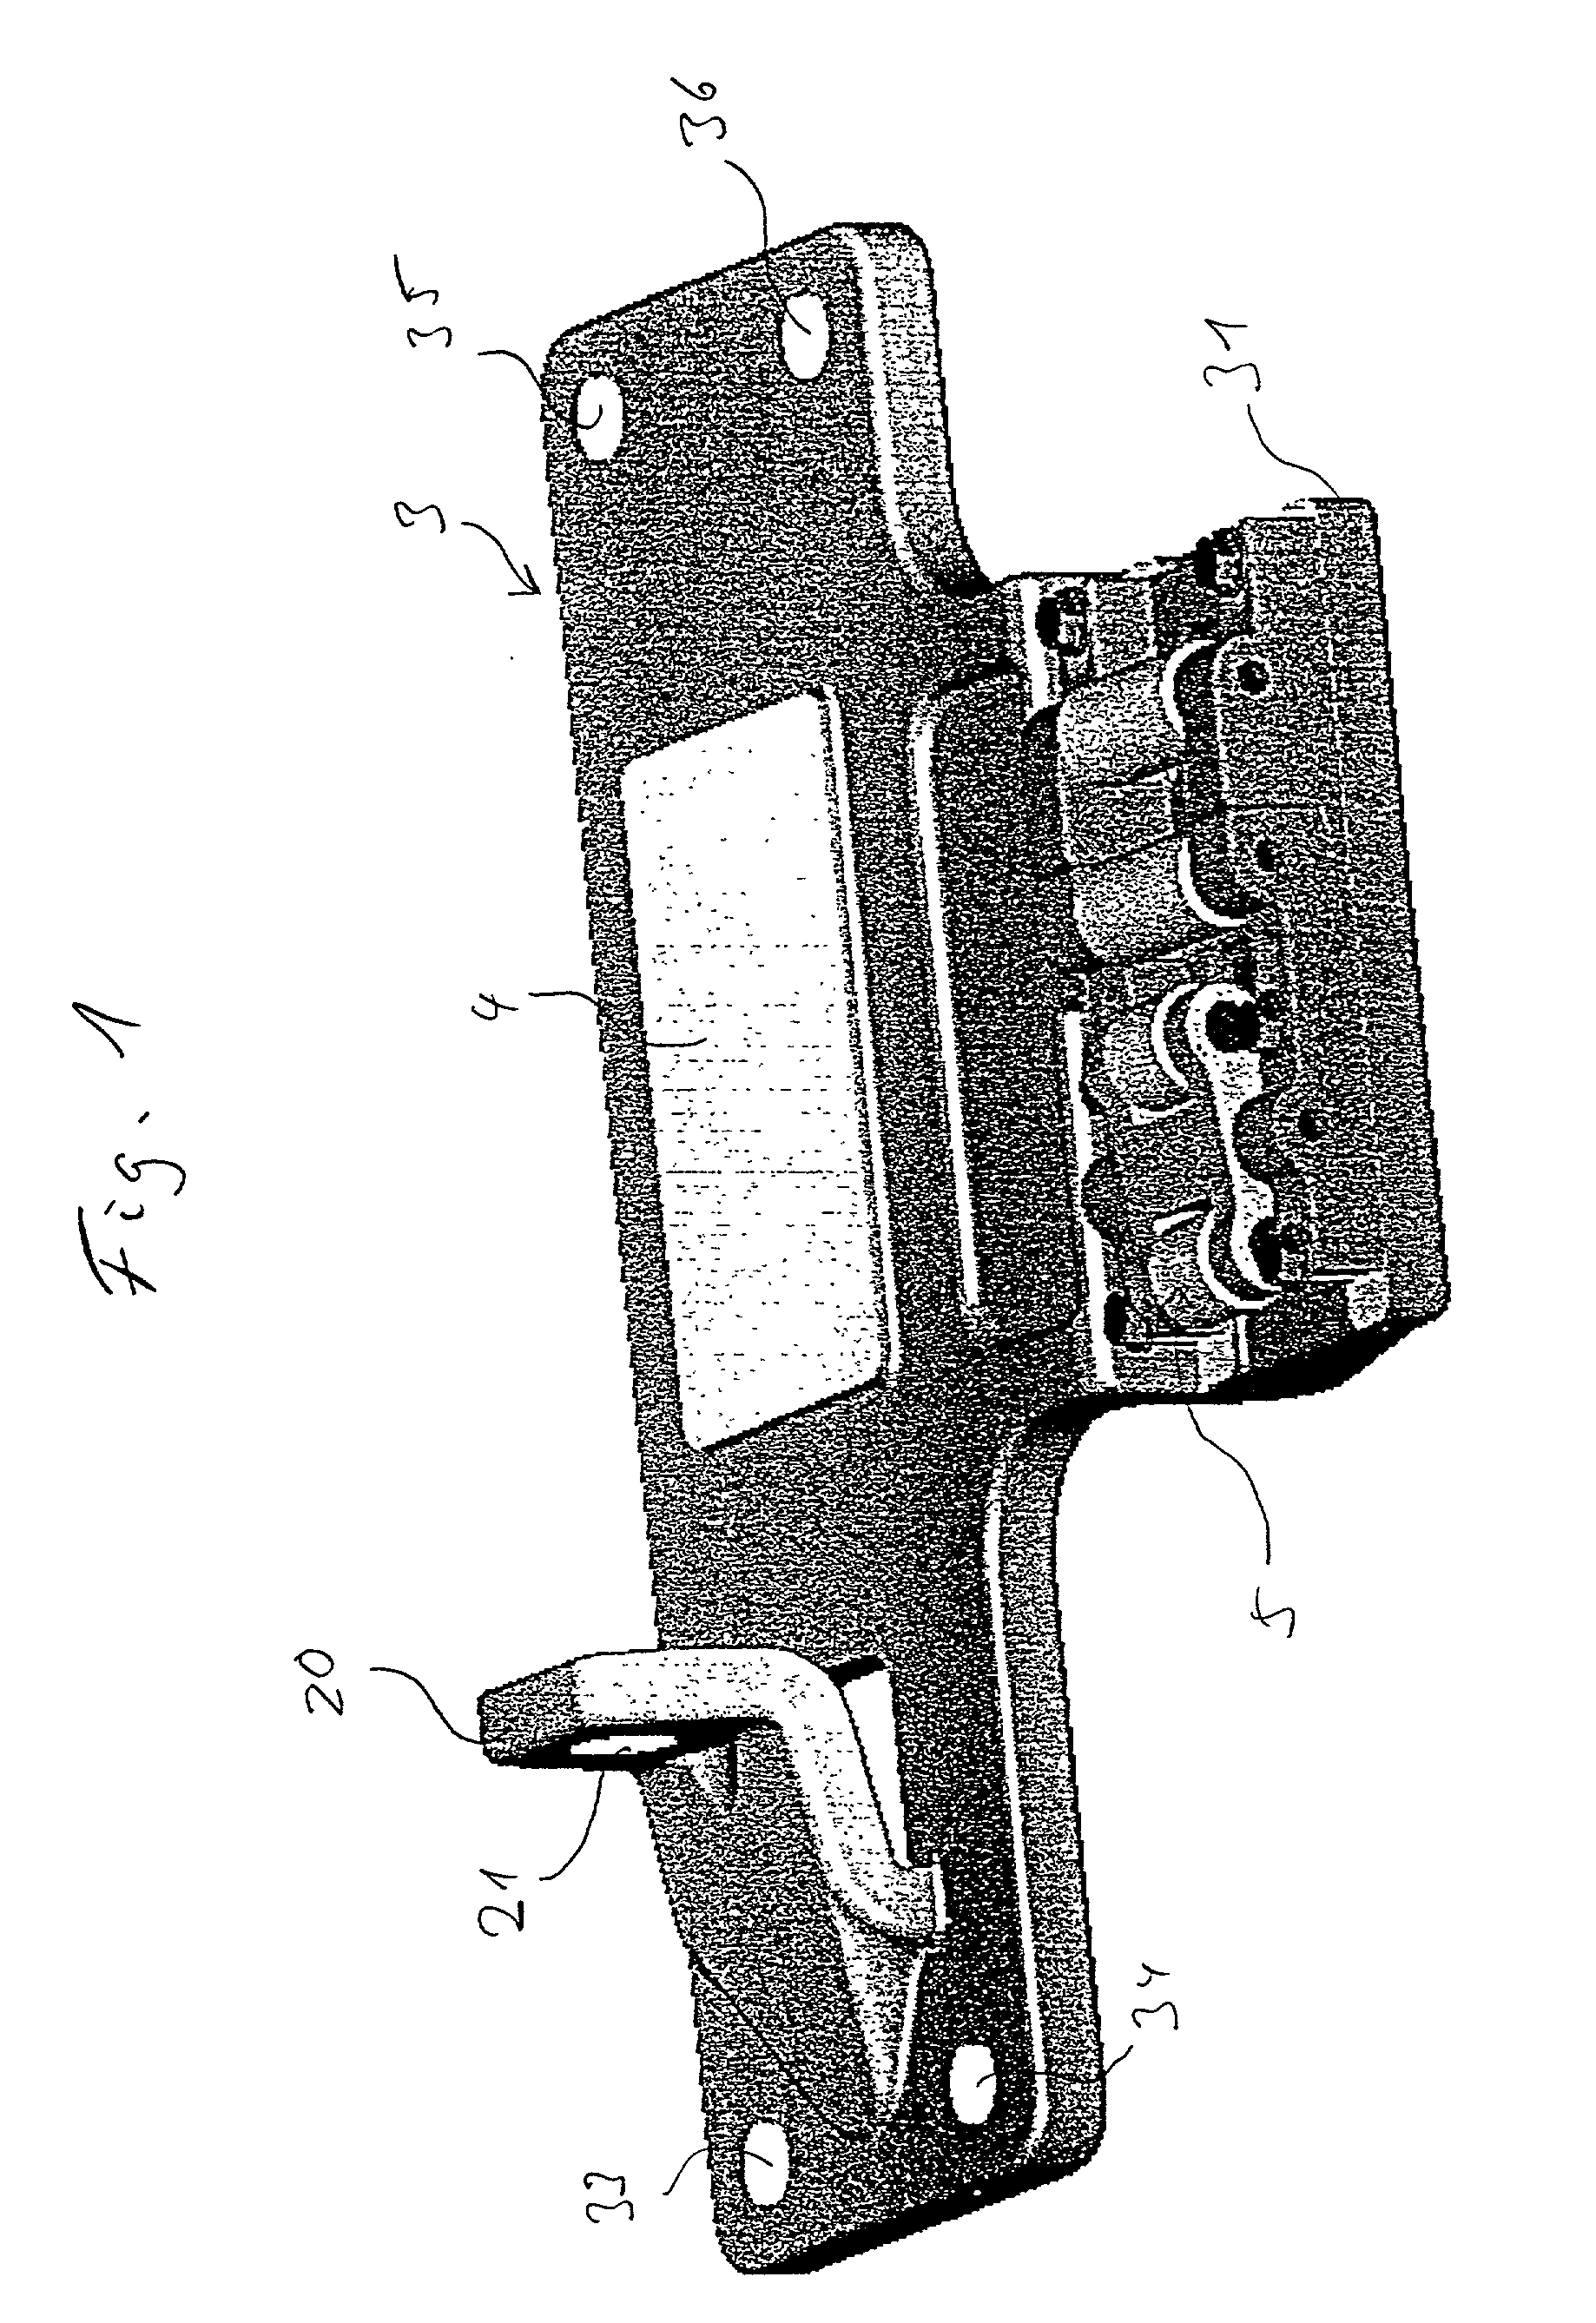 Tongue lifting device for tongue blades made of stock rail profiles